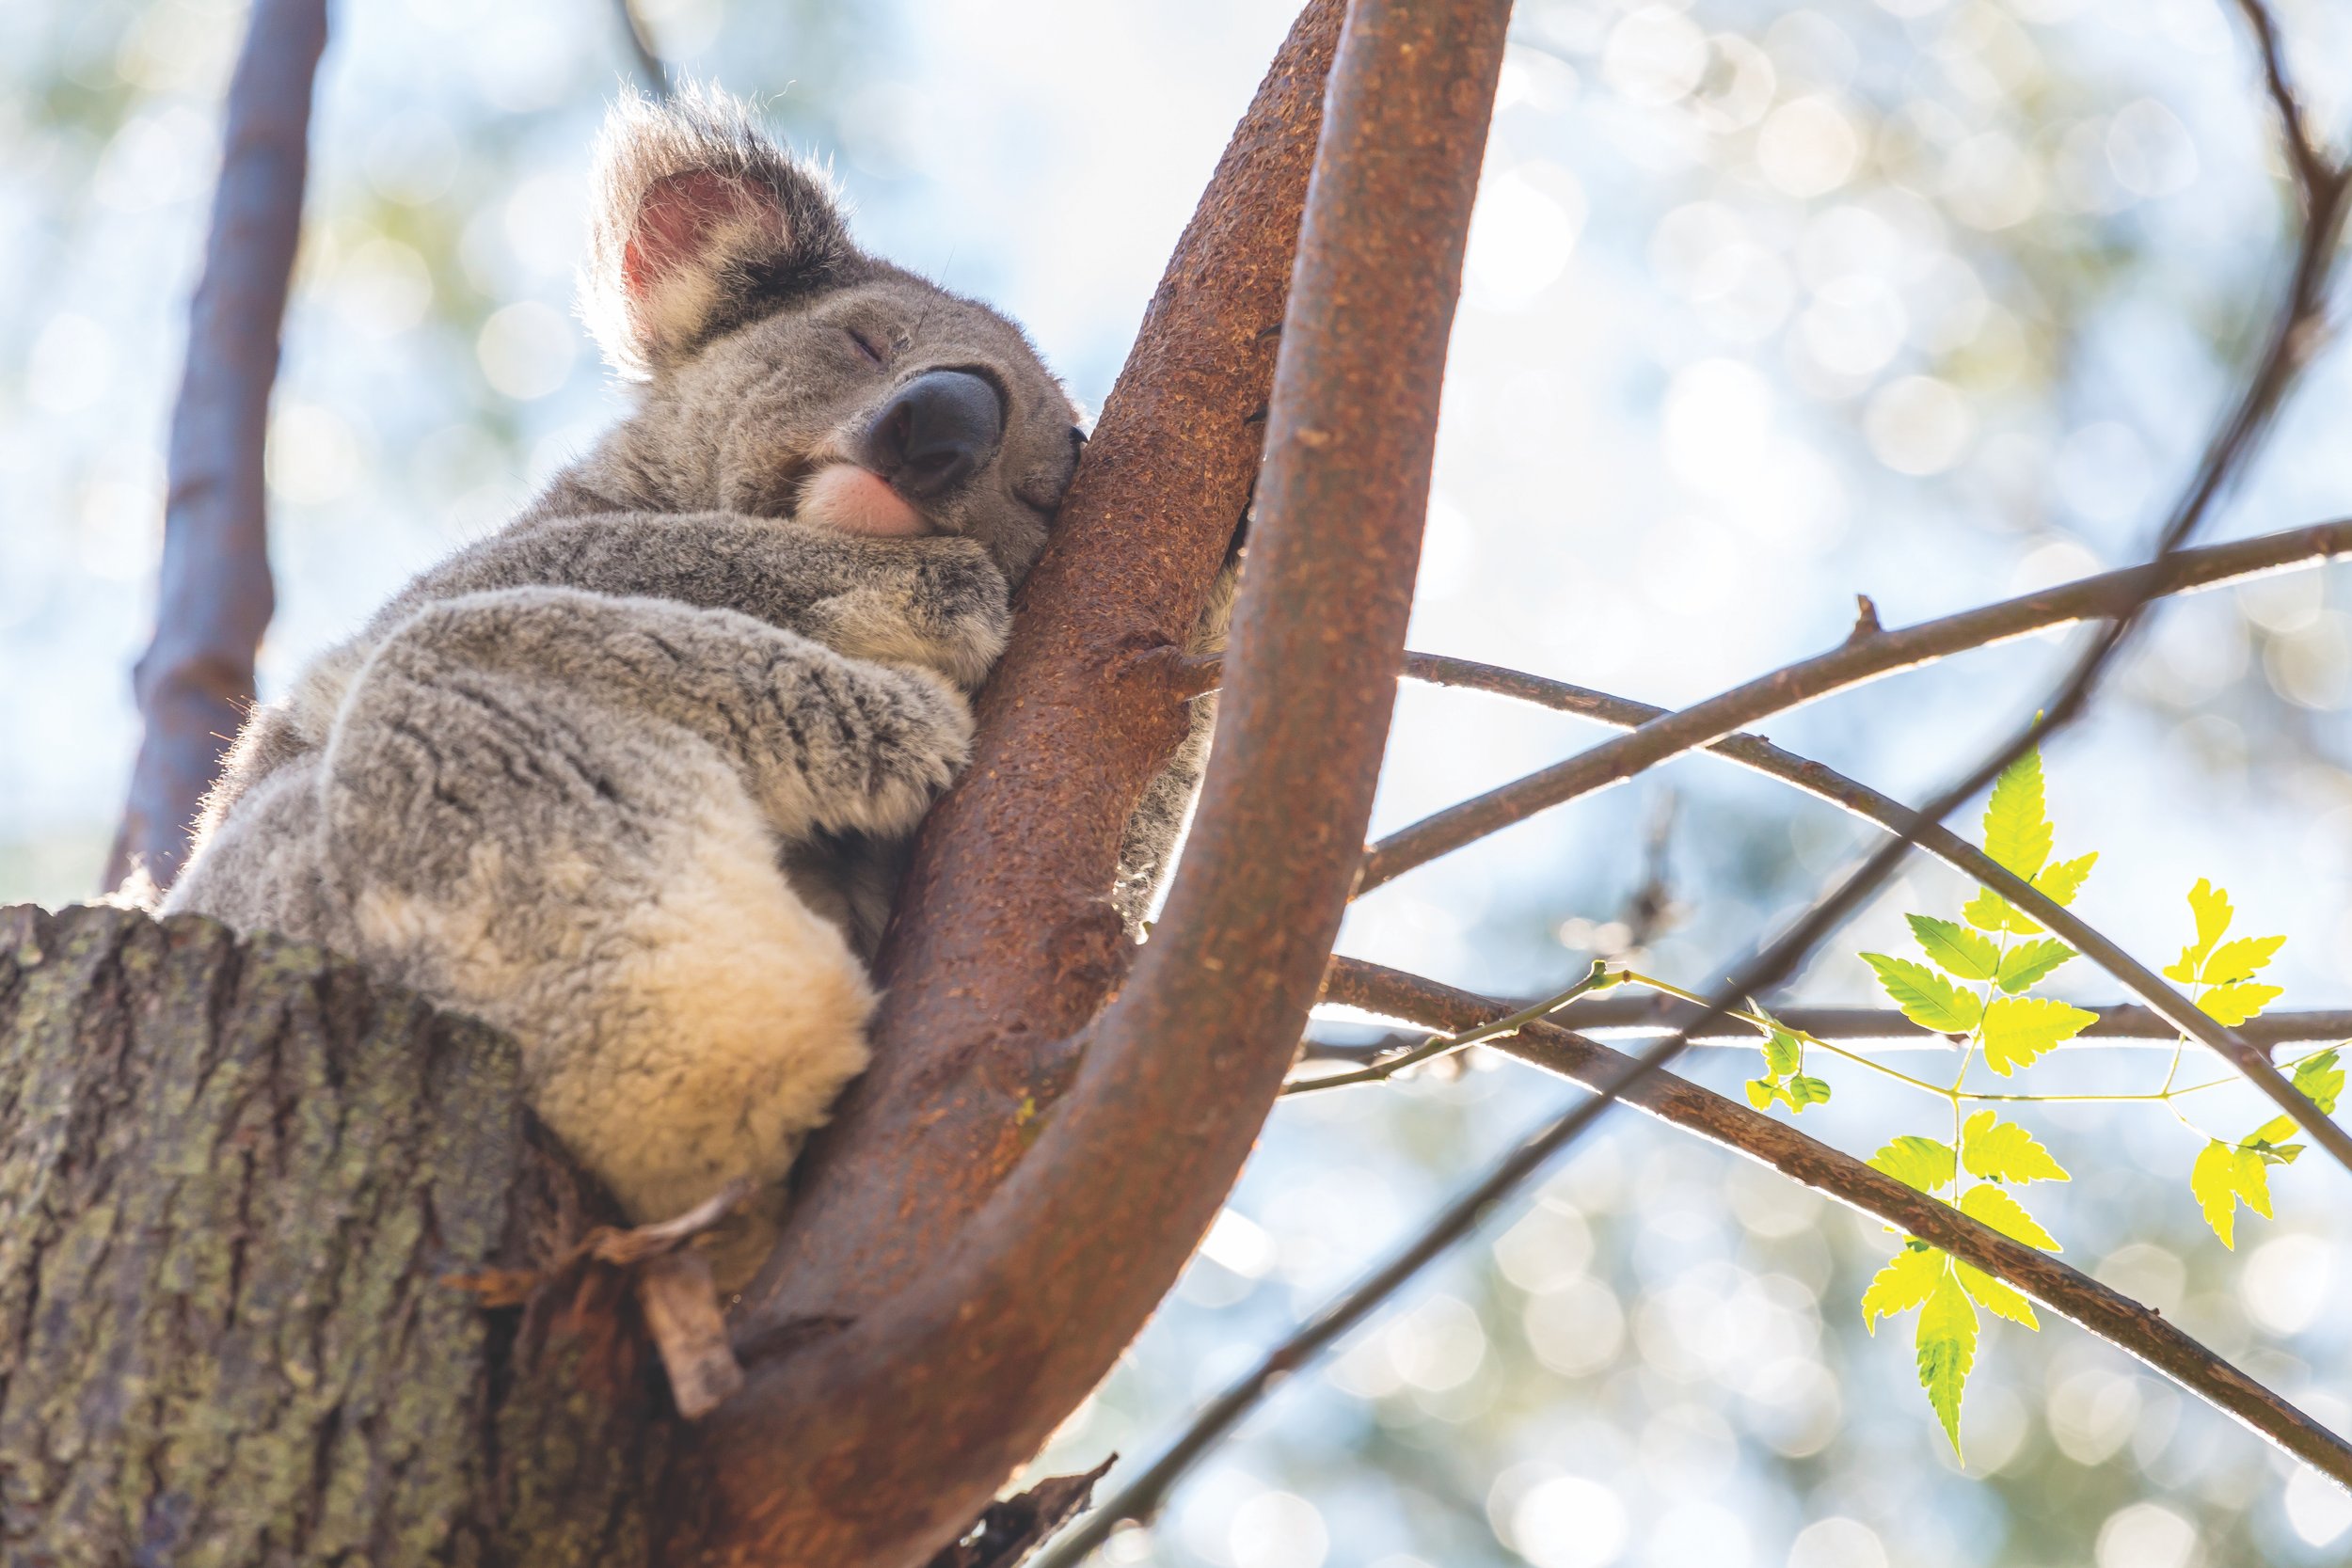  While the kangaroo may be the national animal, the cuddly koala bear is symbolic of the Land Down Under. 